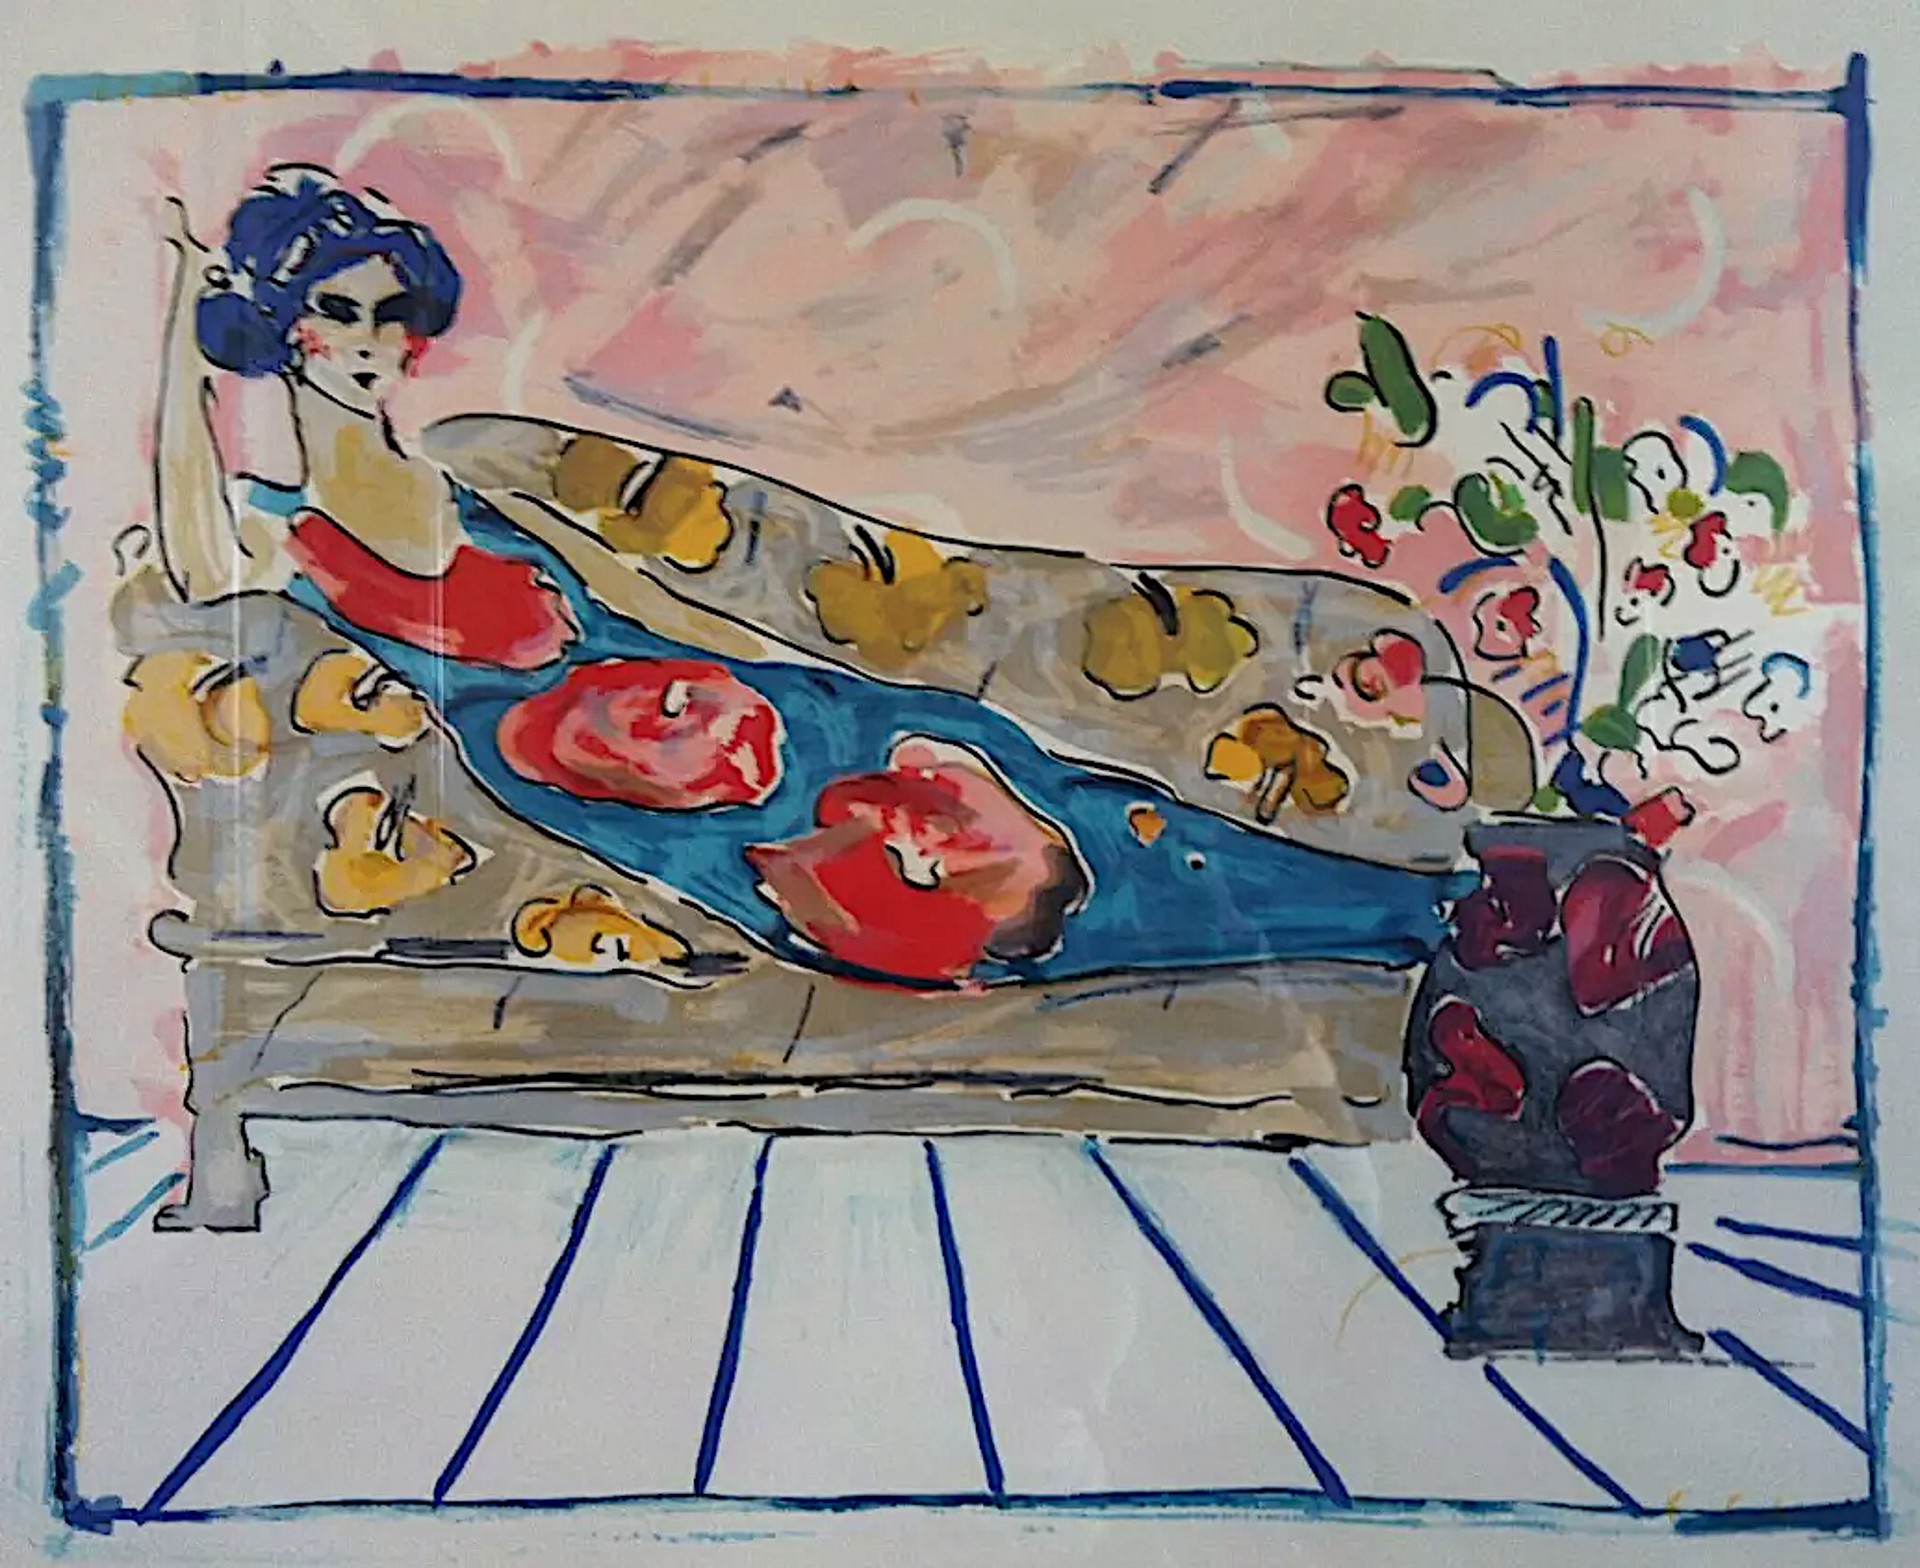 Lady on Couch - Blue by Peter Max